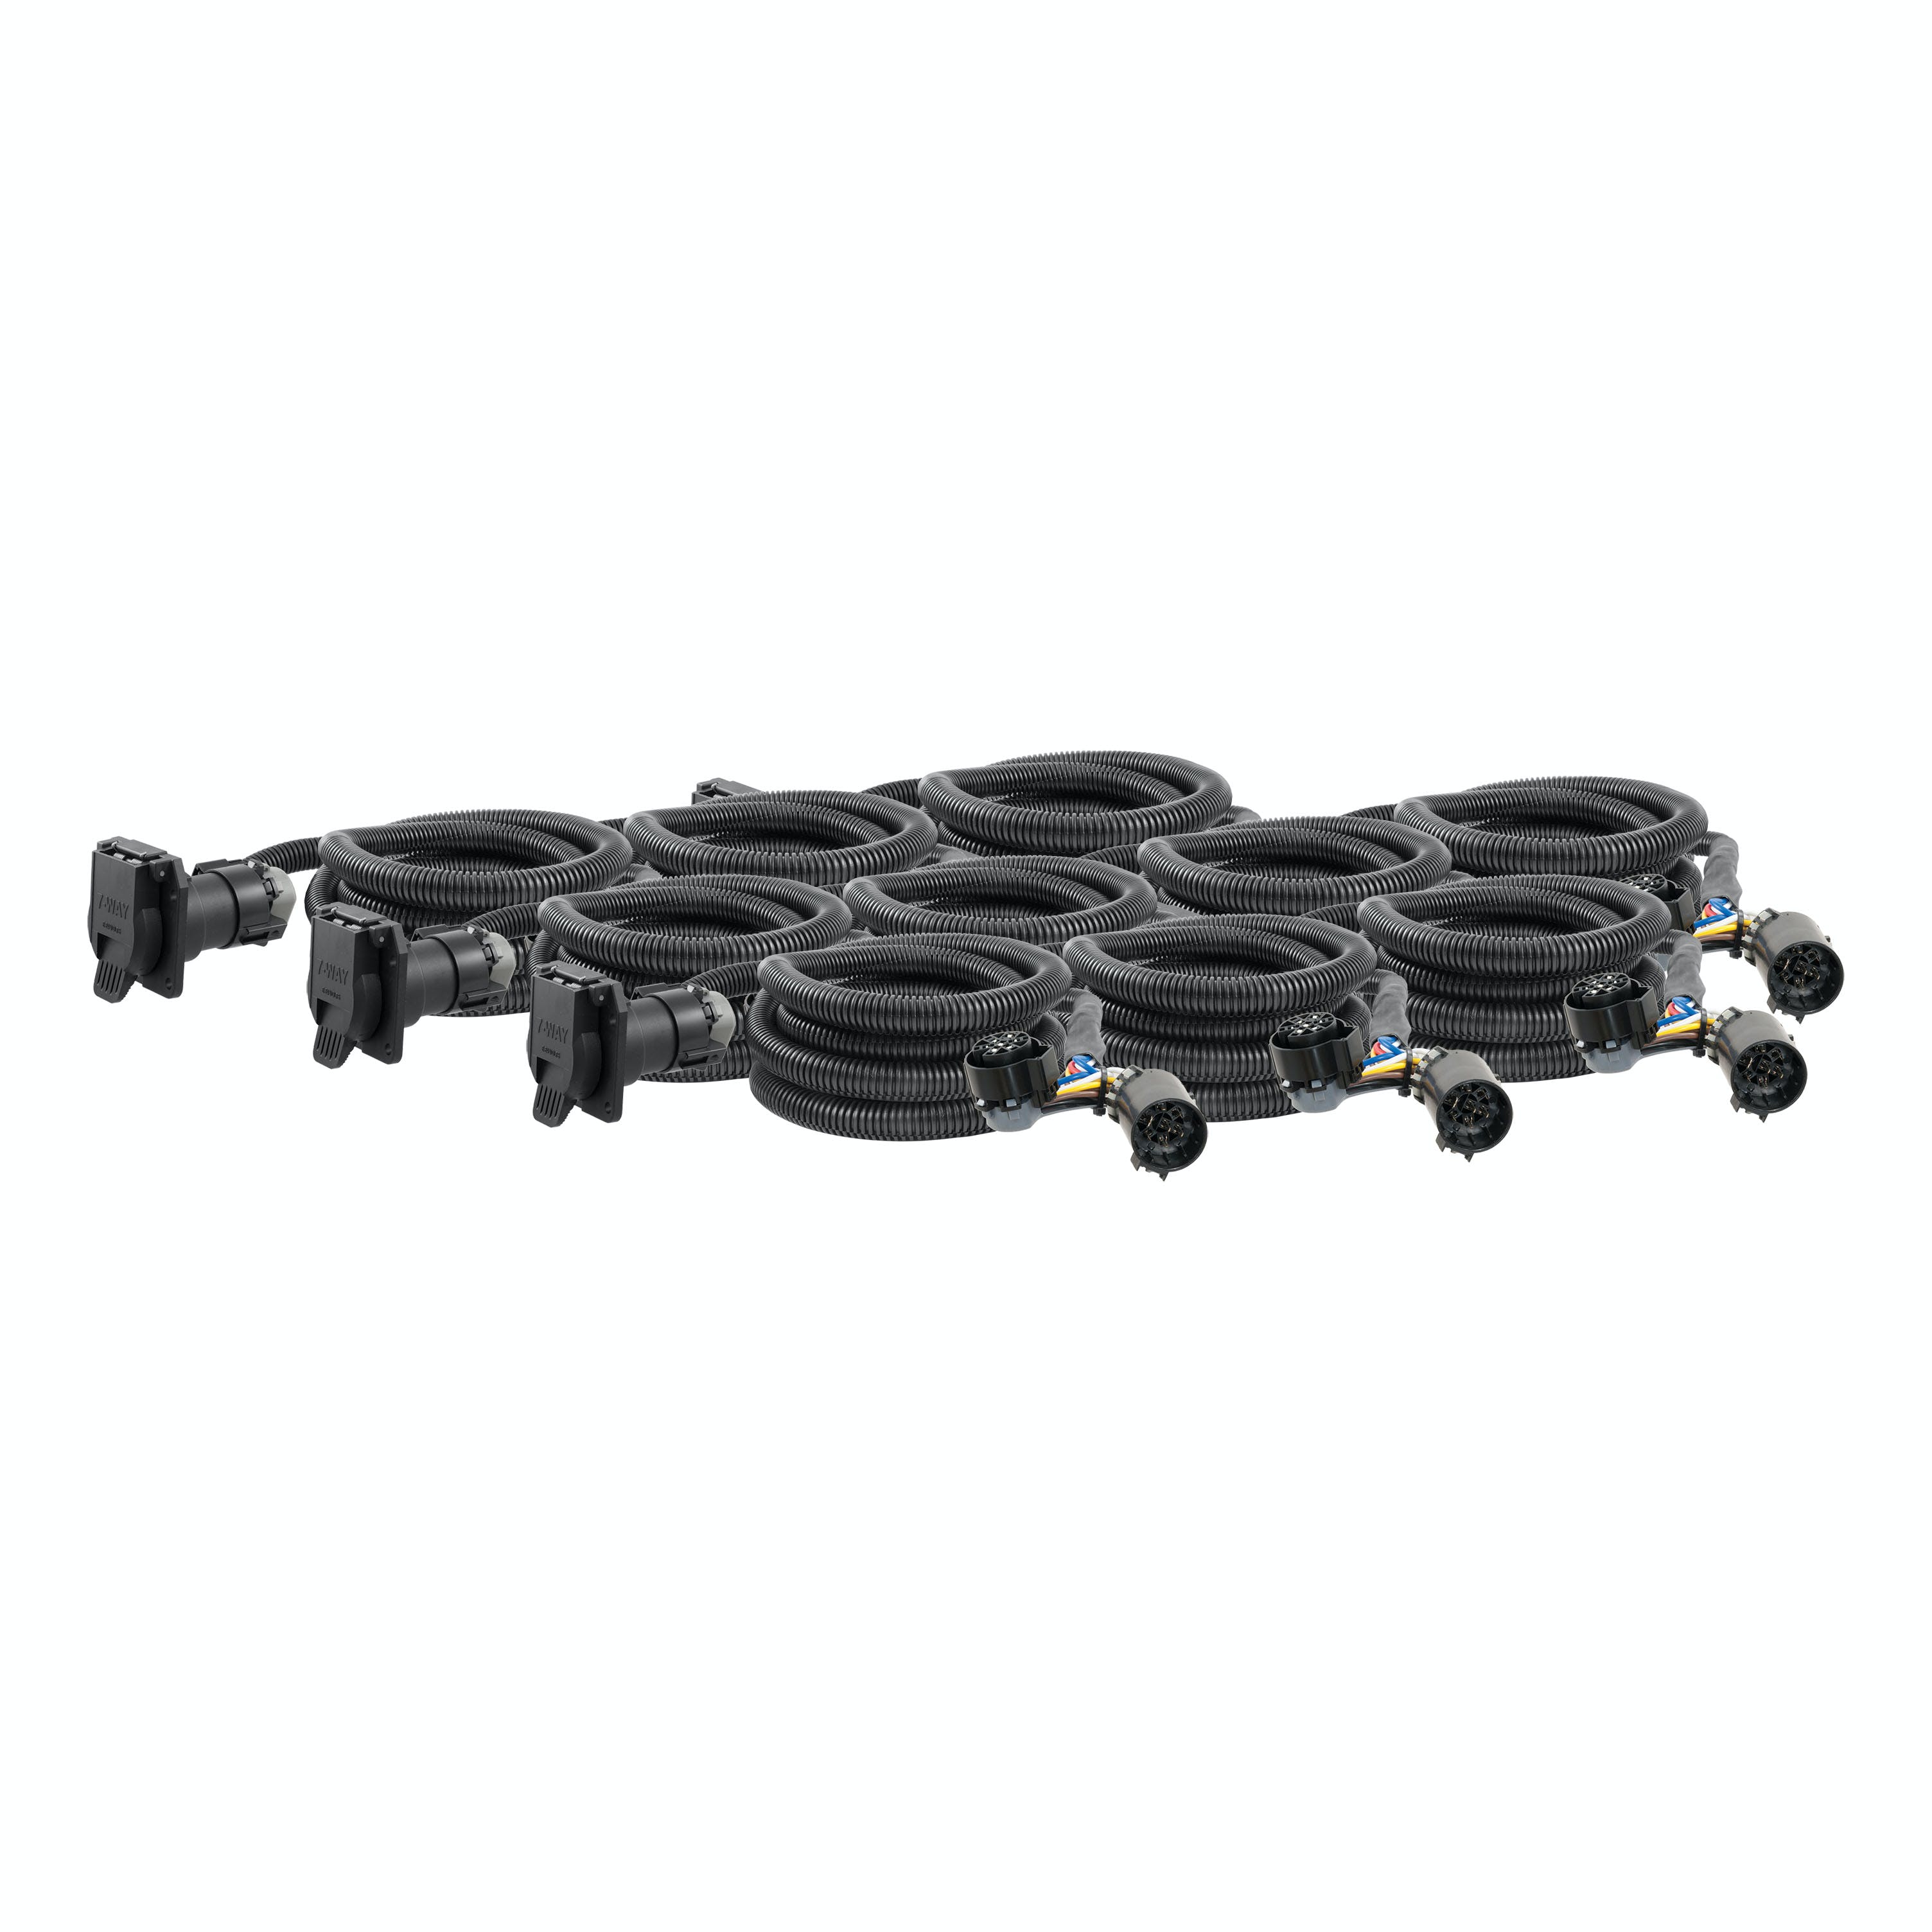 CURT 56000010 10' Custom Wiring Extension Harnesses (Adds 7-Way RV Blade to Truck Bed, 10Pk)